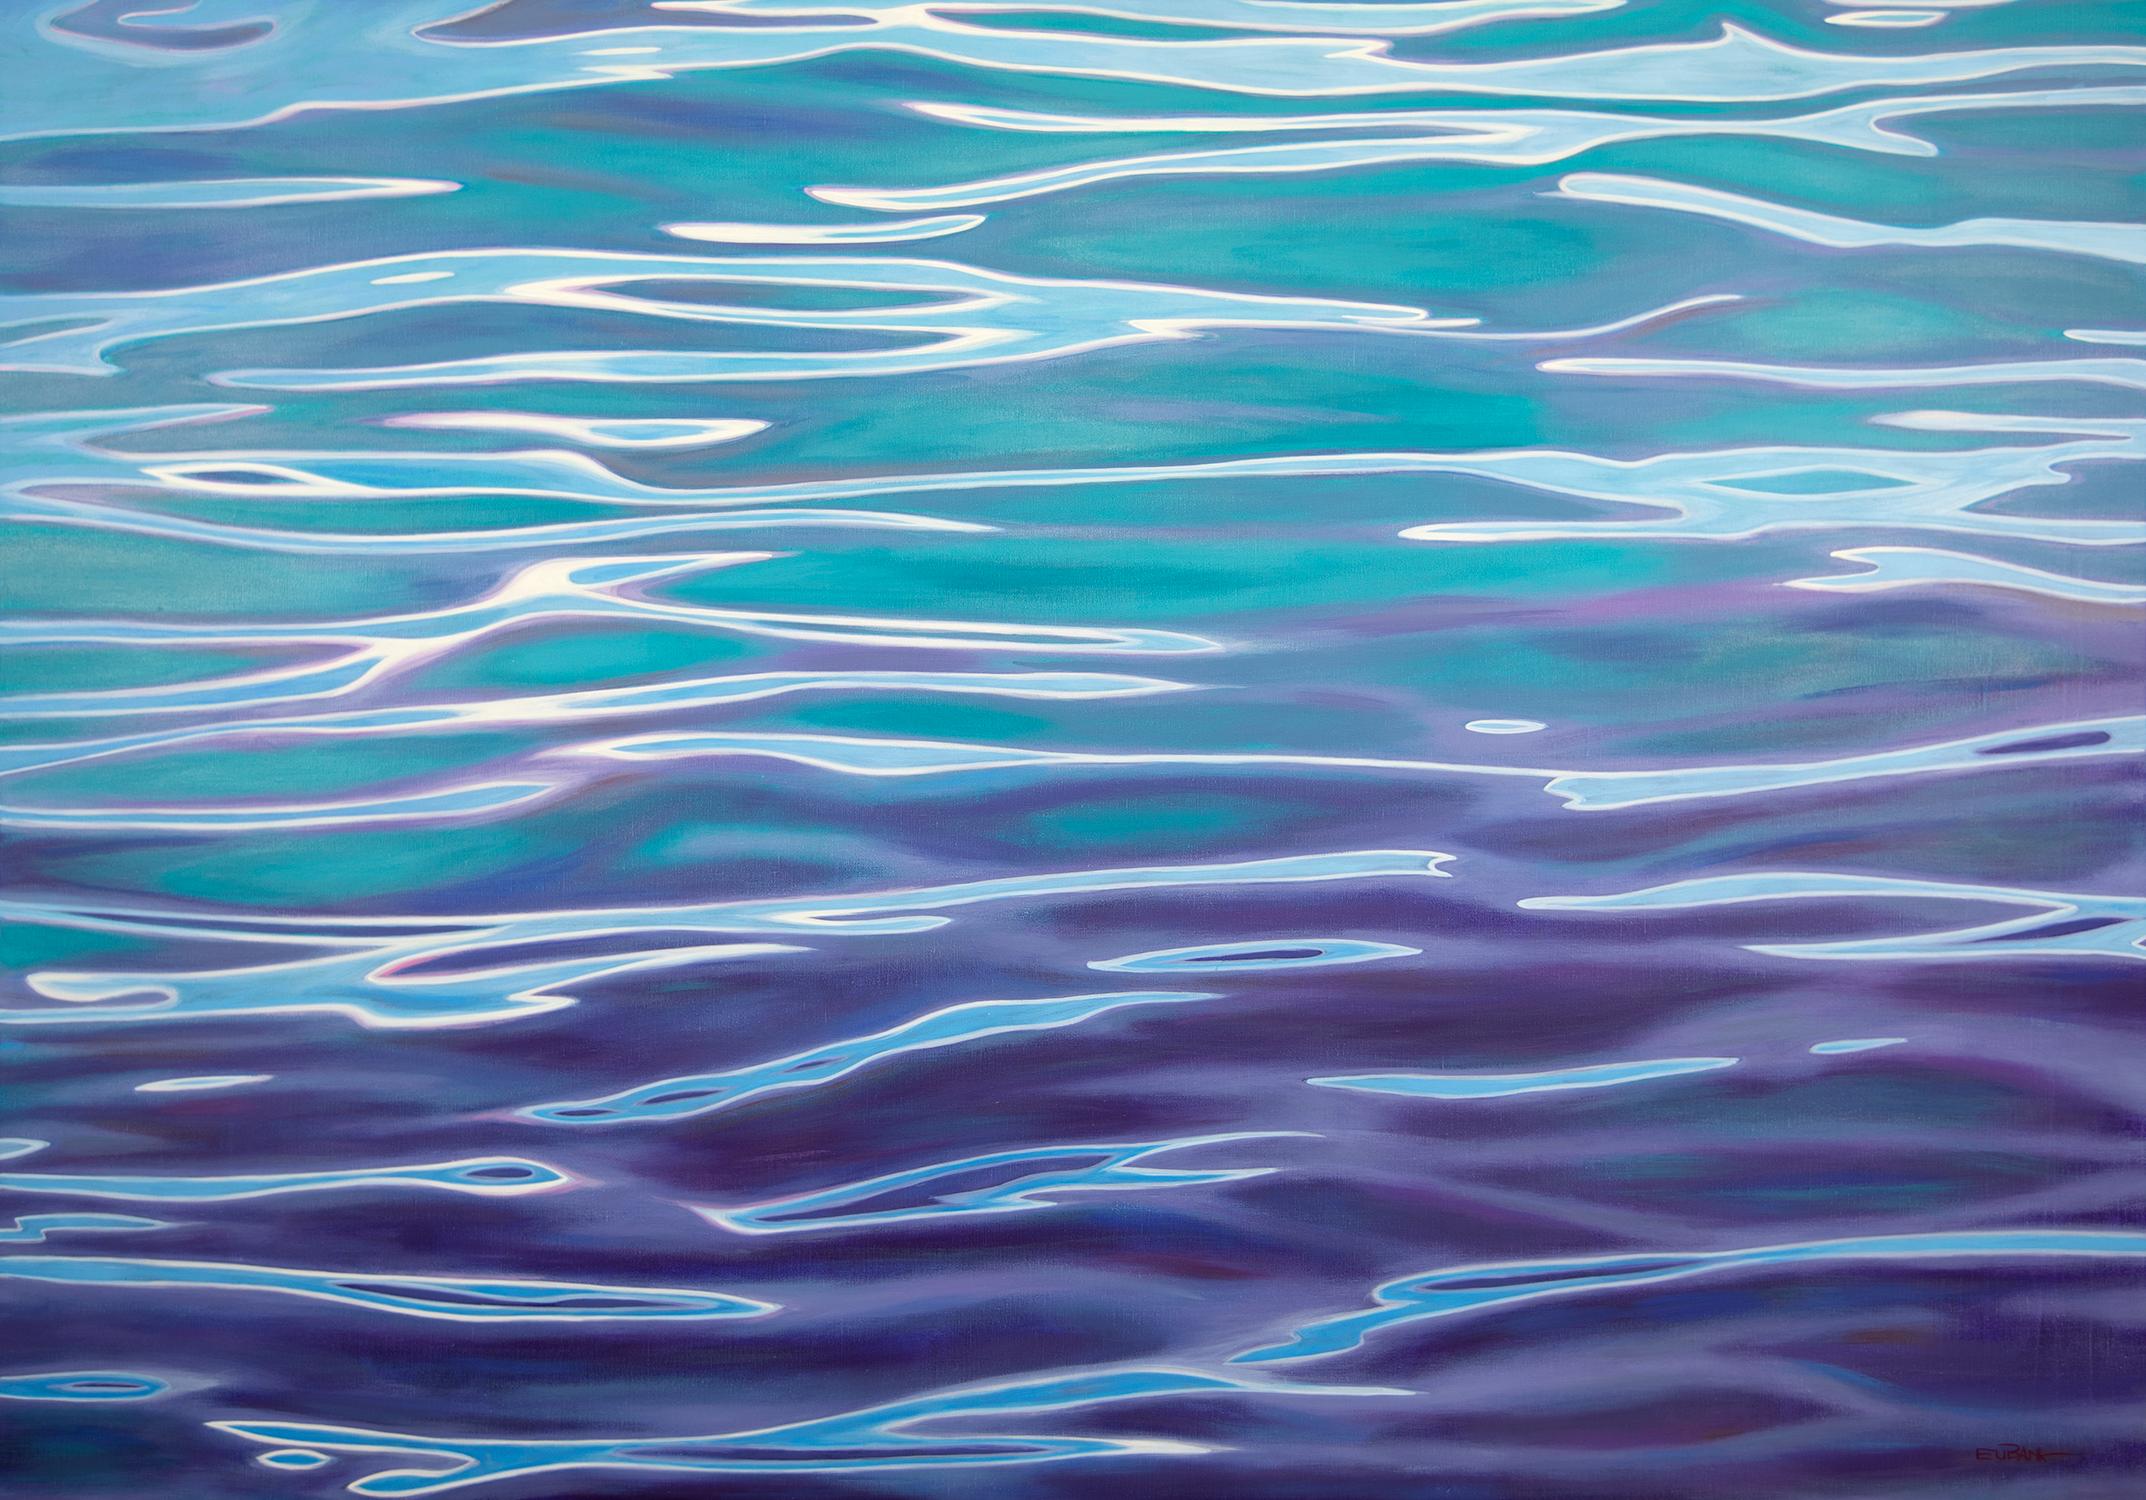 Danielle Eubank went on an expedition vessel to Antarctica where she sketched and took photographs of the the ocean, glaciers, and wildlife including seals. Eubank is an advocate for ocean preservation and protection. This painting is an abstracted